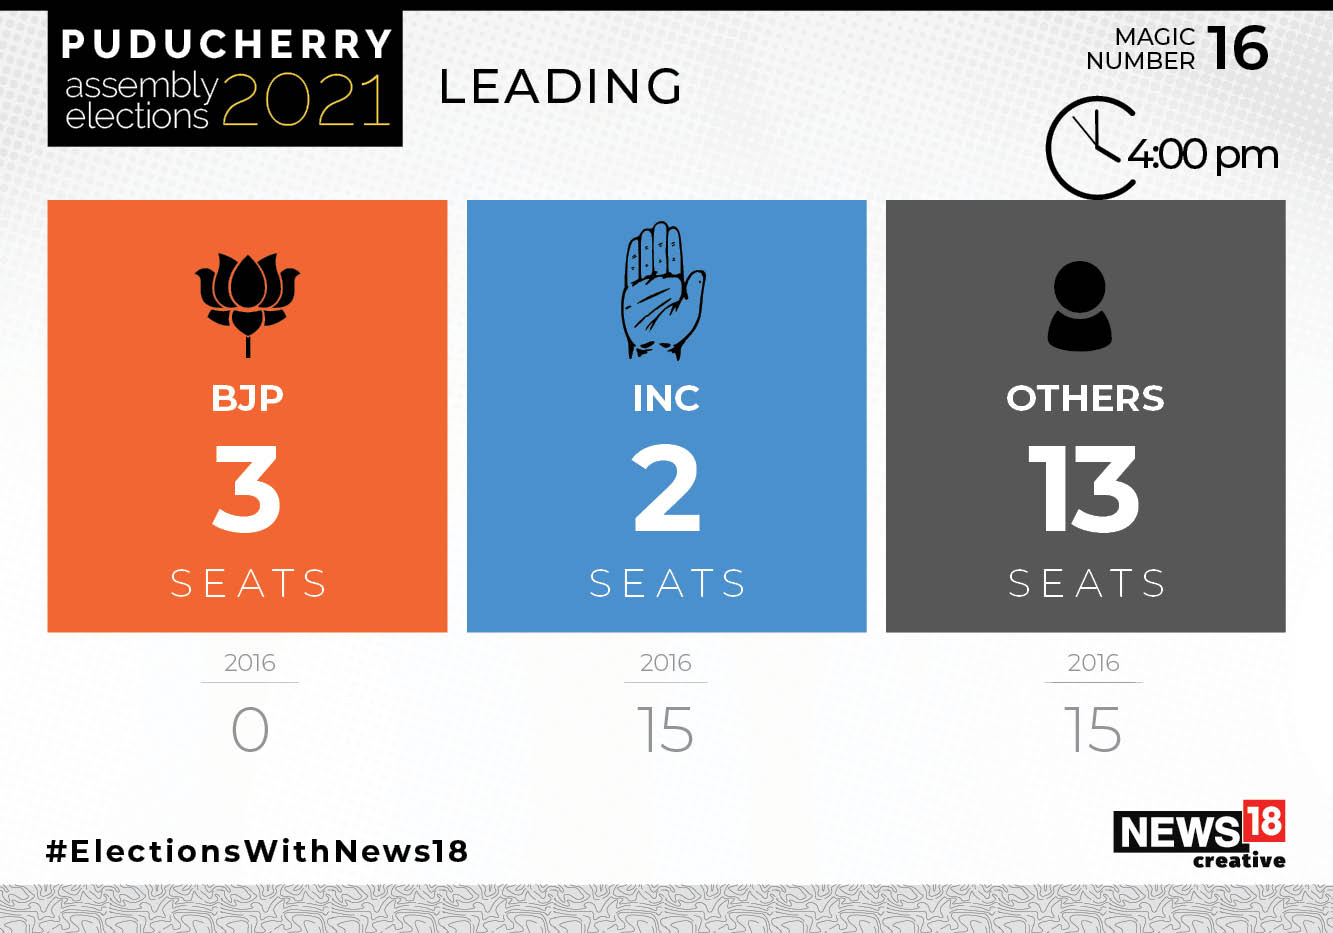 Puducherry Election Results 2021 HIGHLIGHTS: NDA on course to form govt in UT